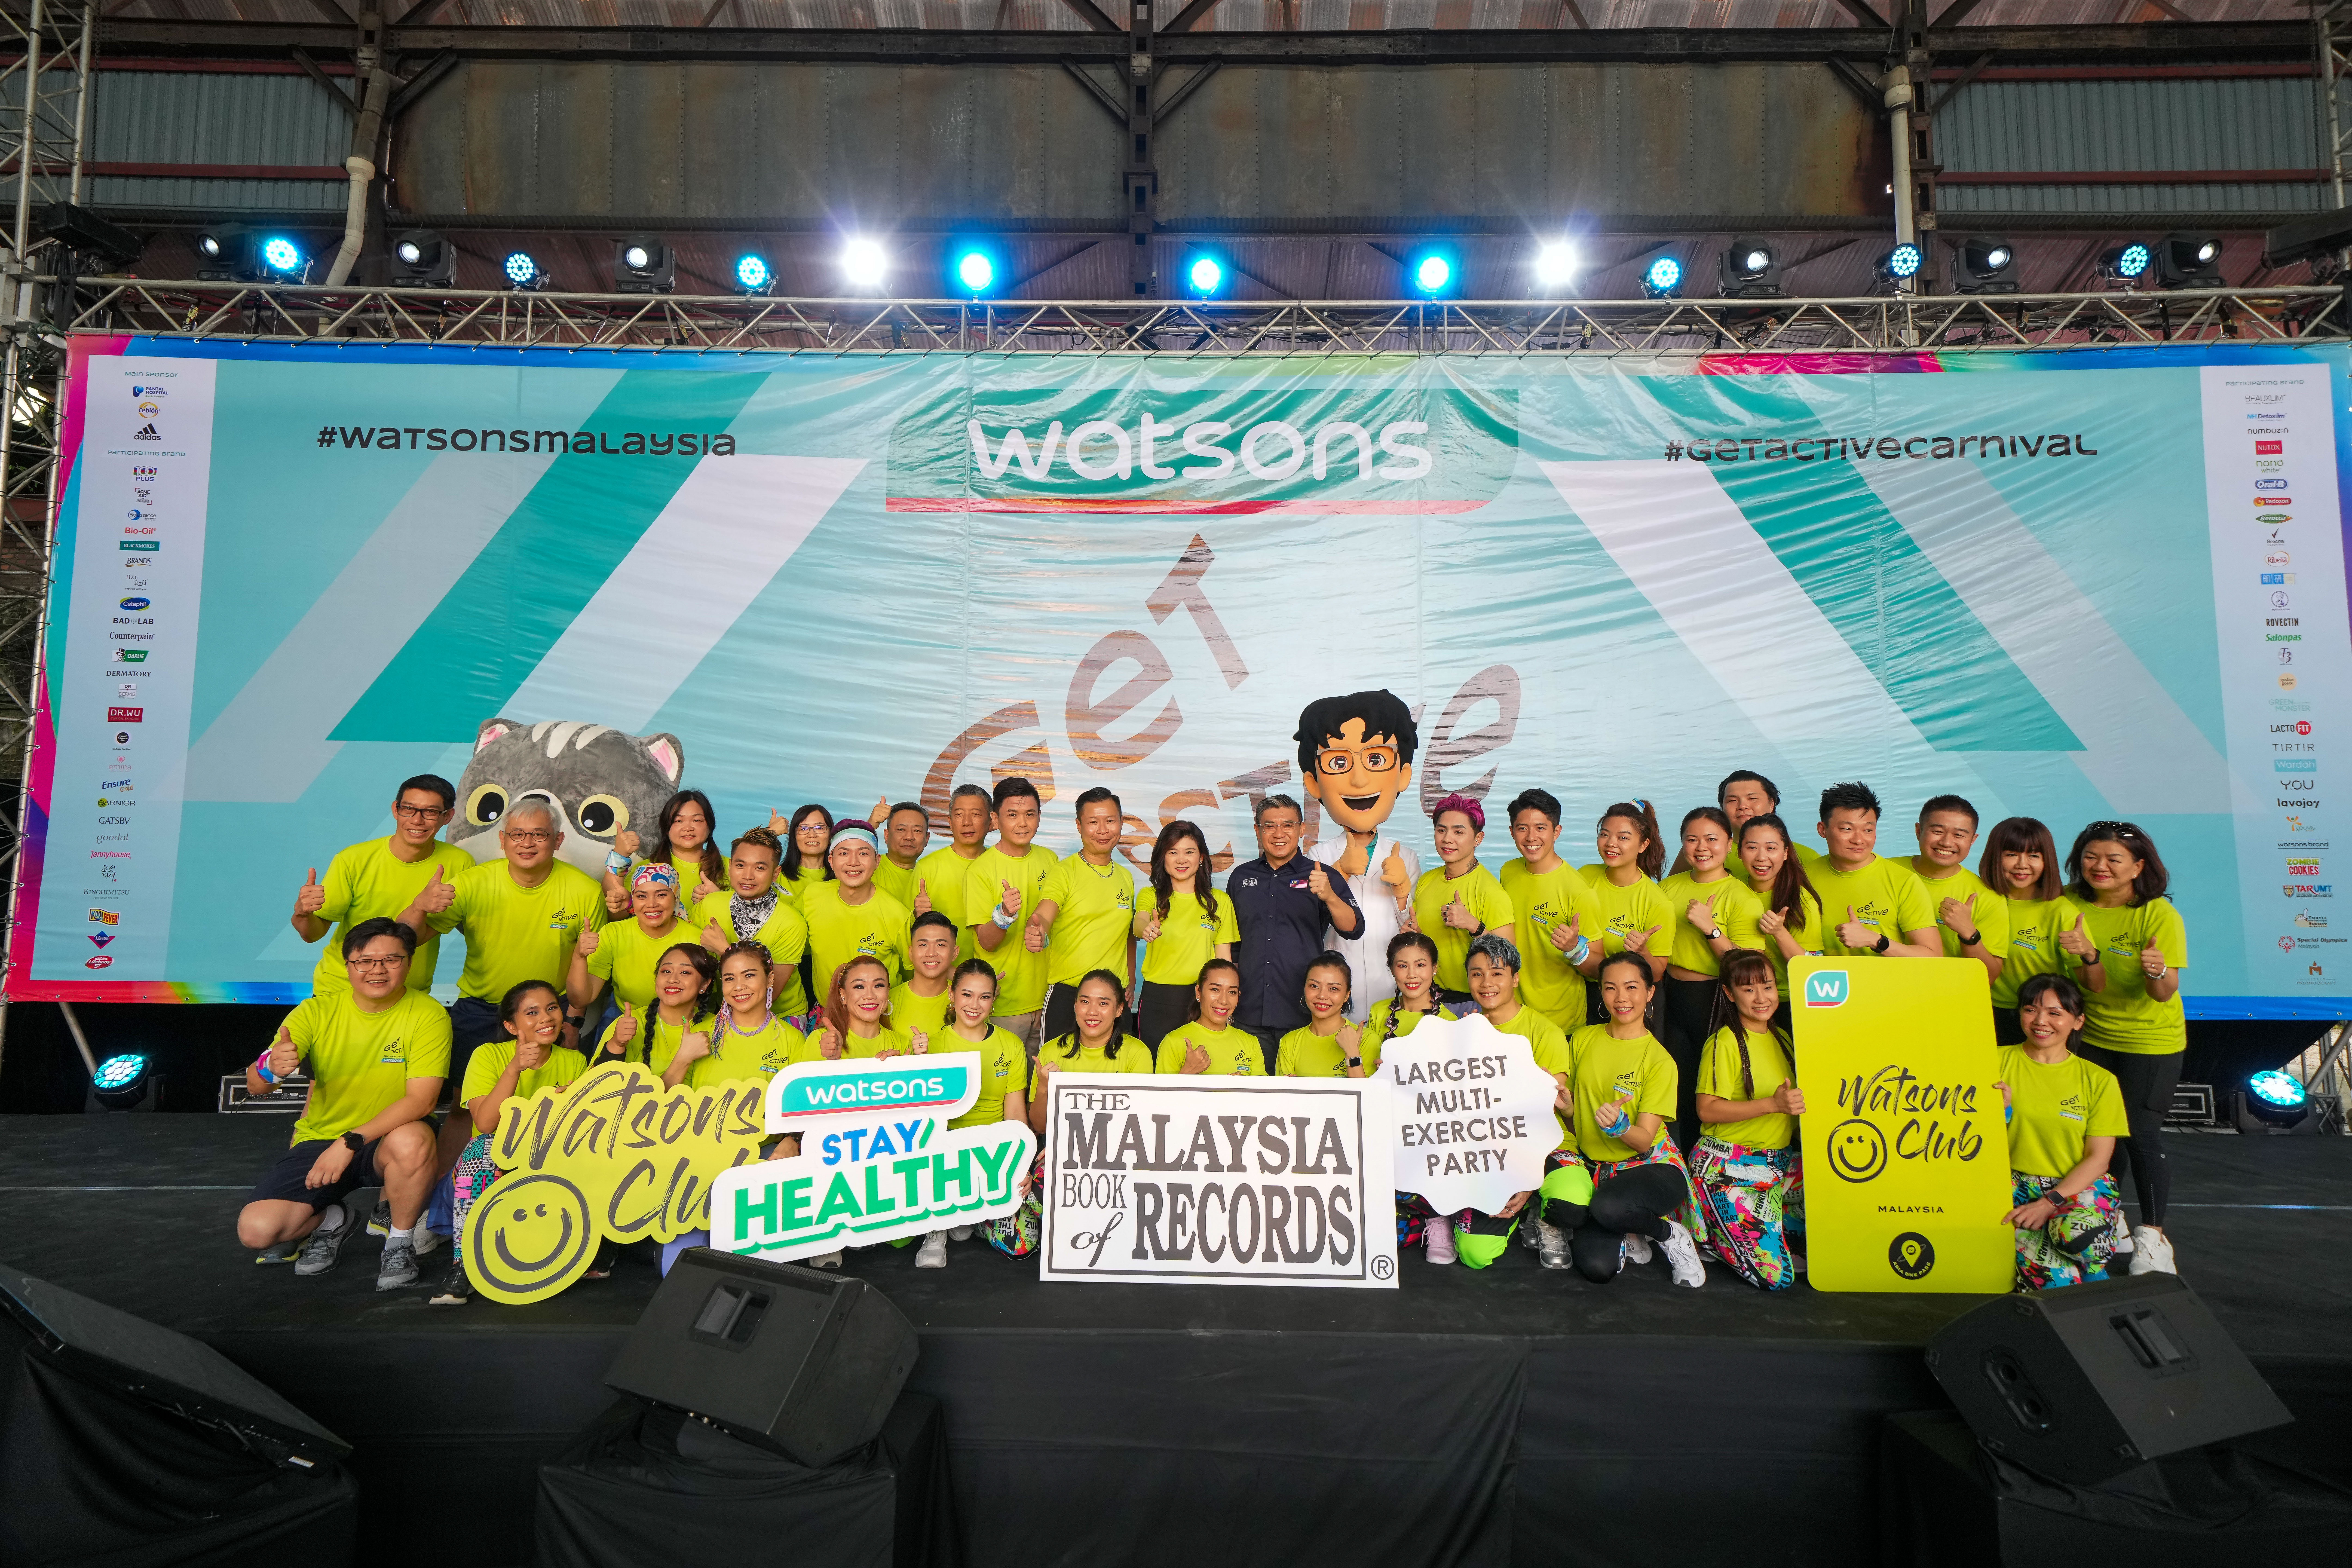 Watsons get active carnival breaks record